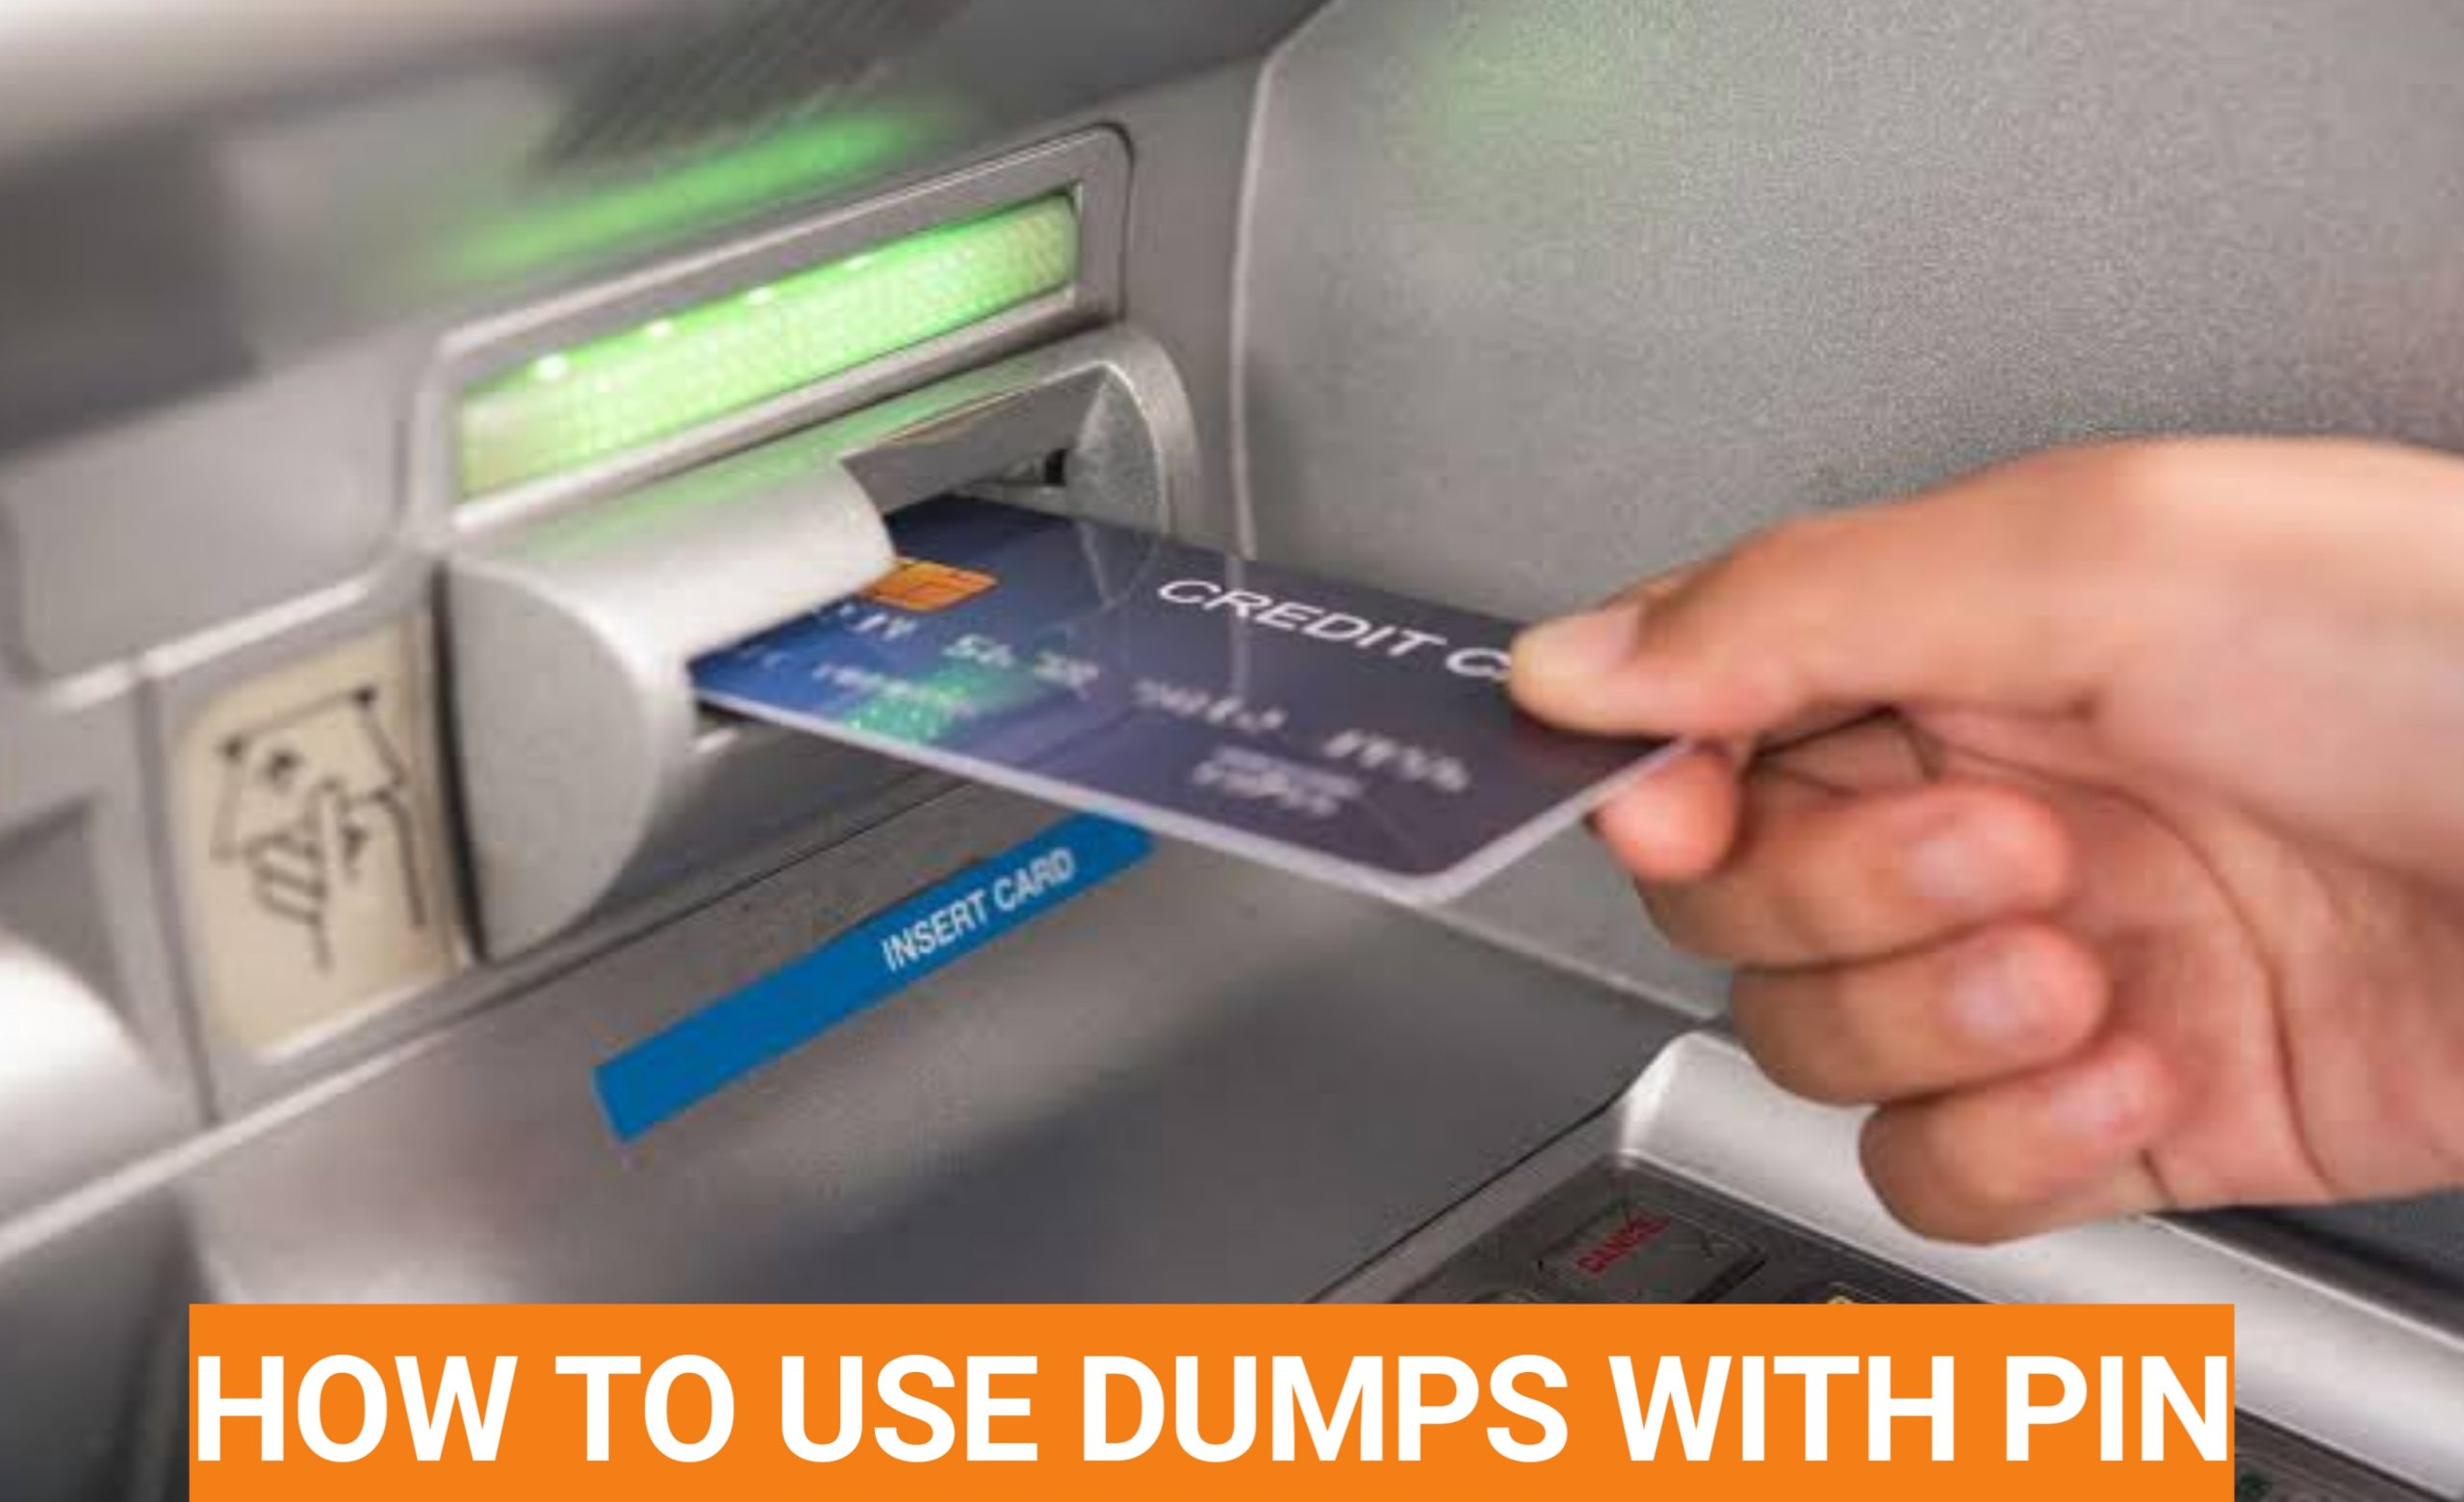 Dumps with pin